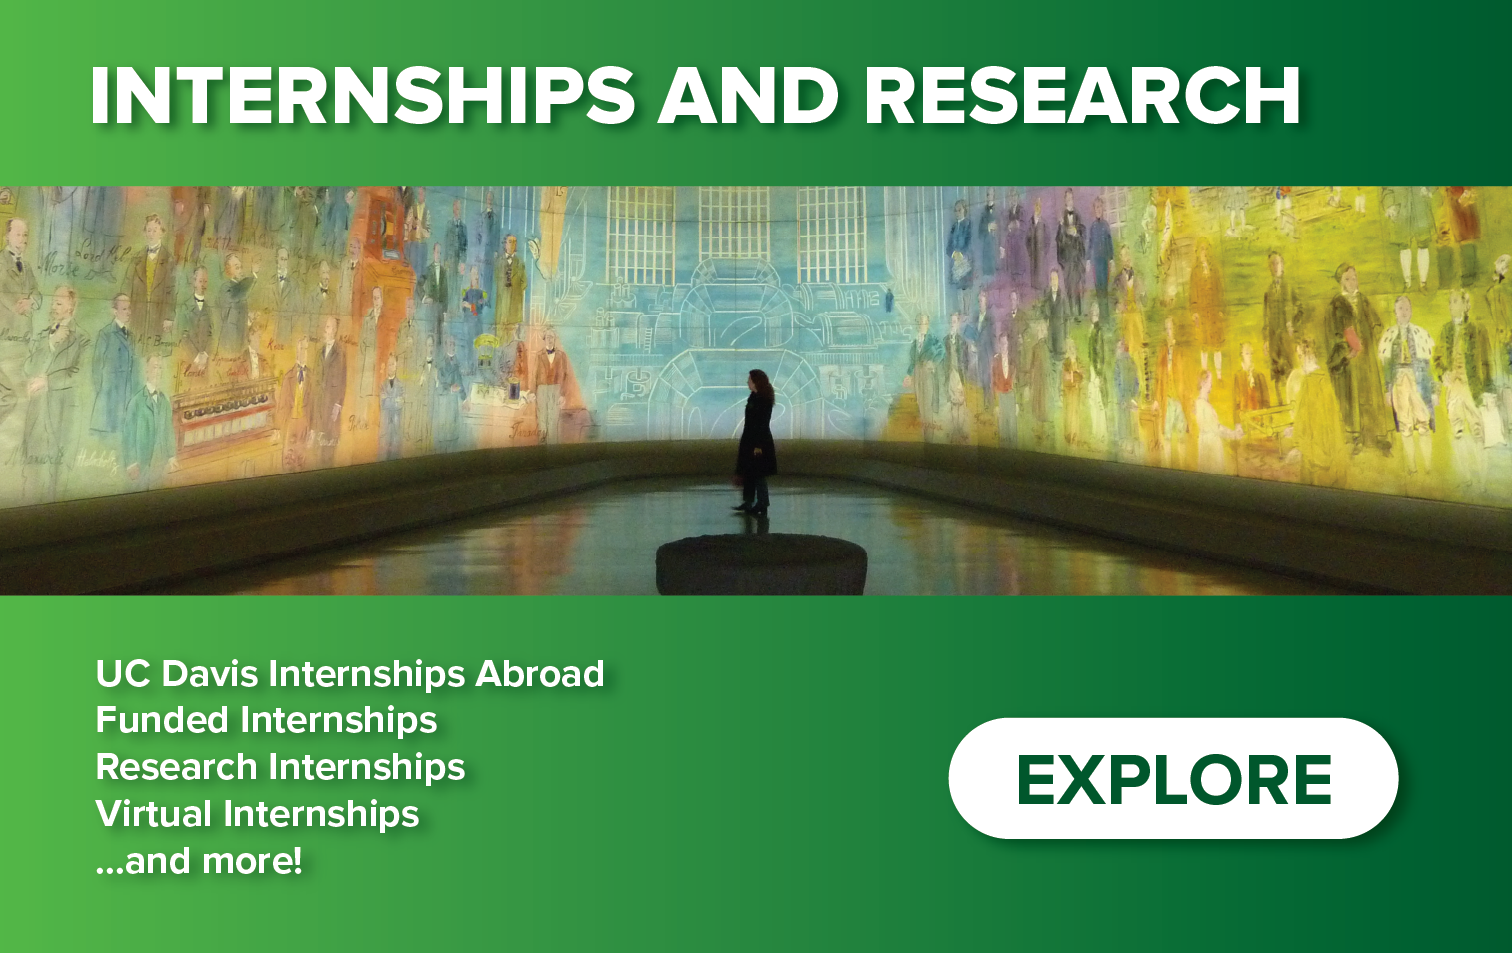 Teaser Image - Click to learn more about Internship and Research opportunities